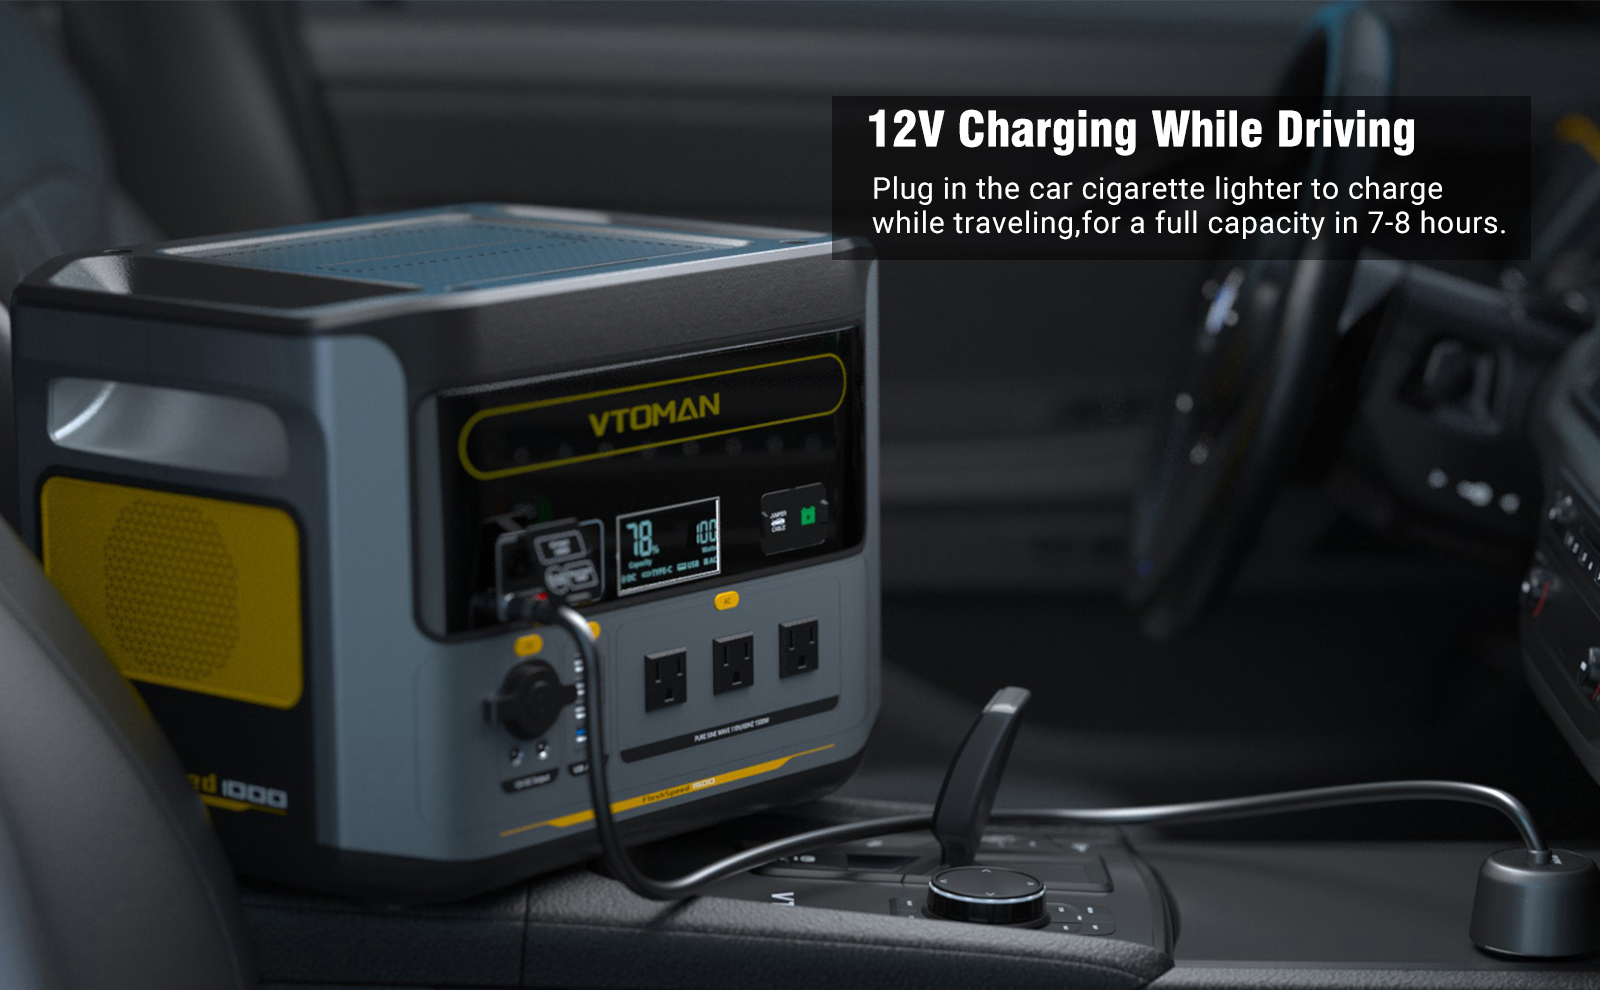 FlashSpeed 1000 power station supports 12V Car charging